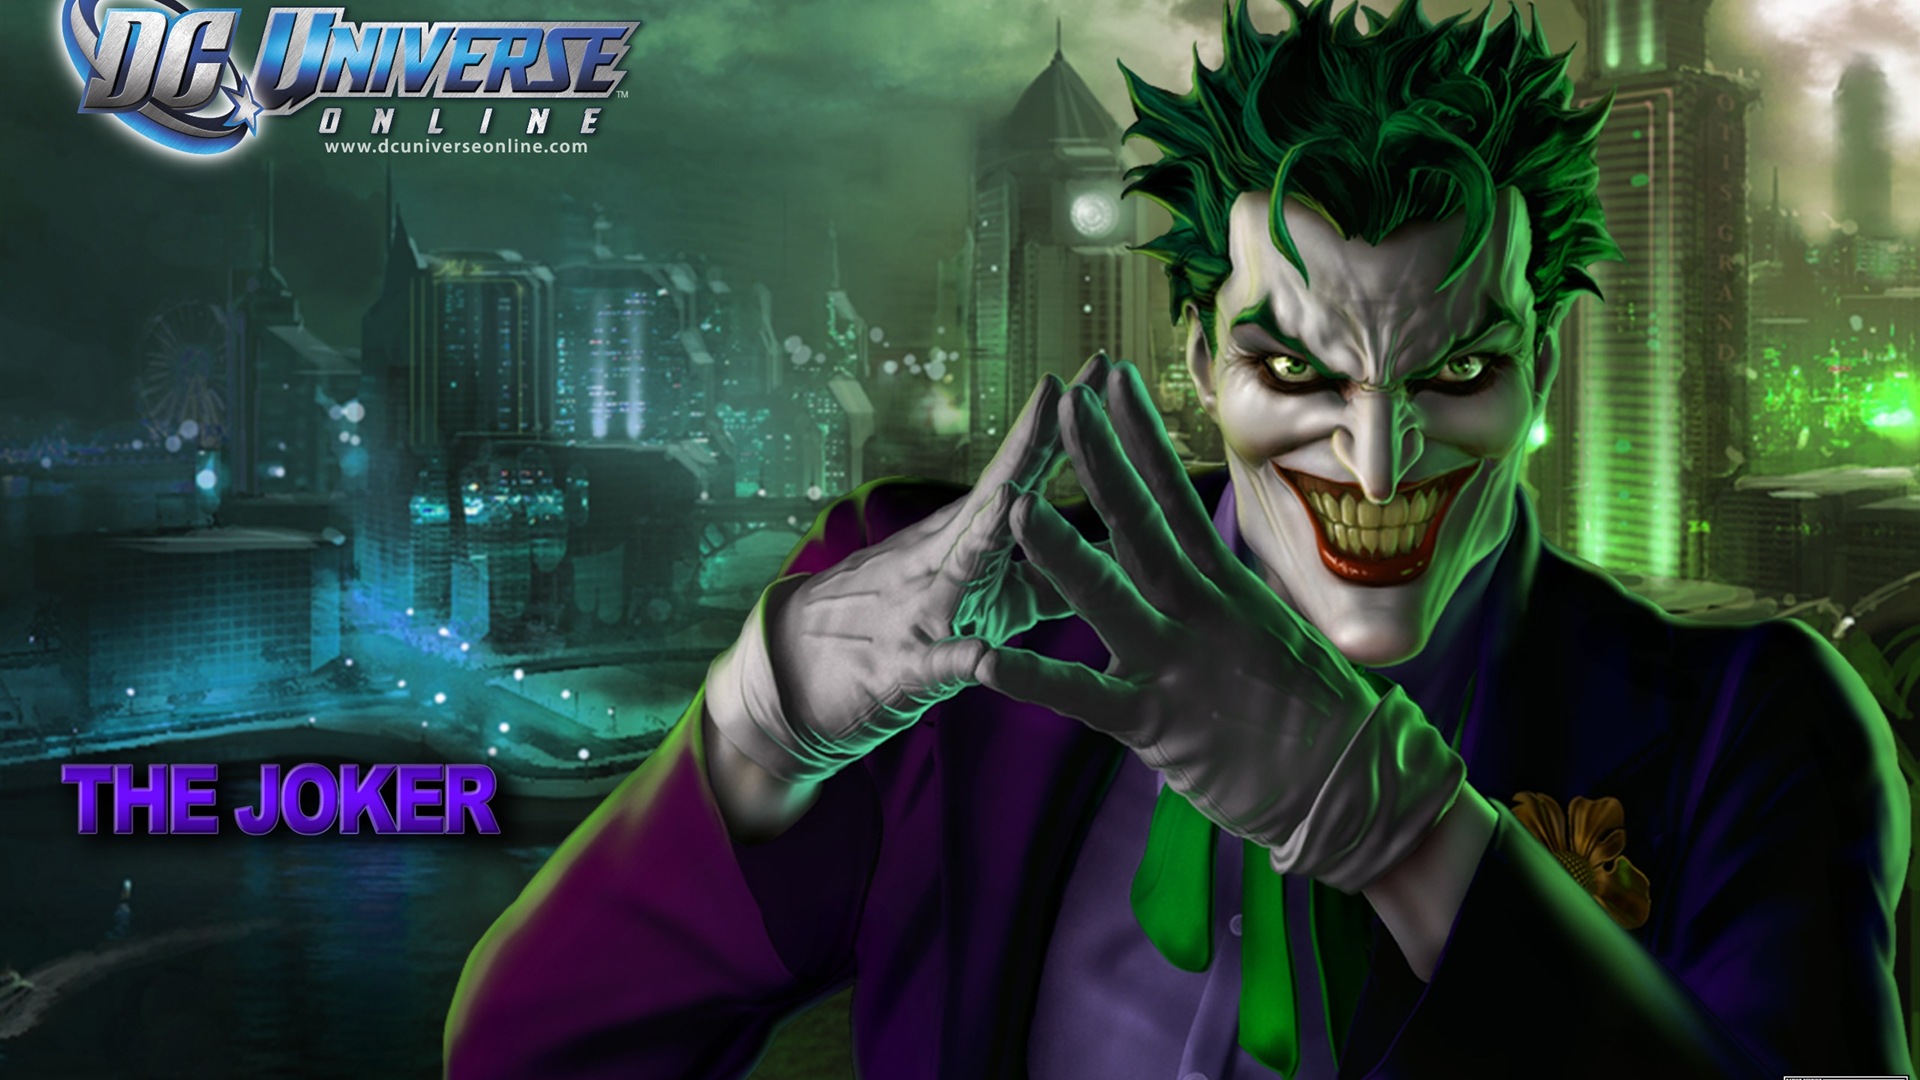 DC Universe Online HD game wallpapers #11 - 1920x1080